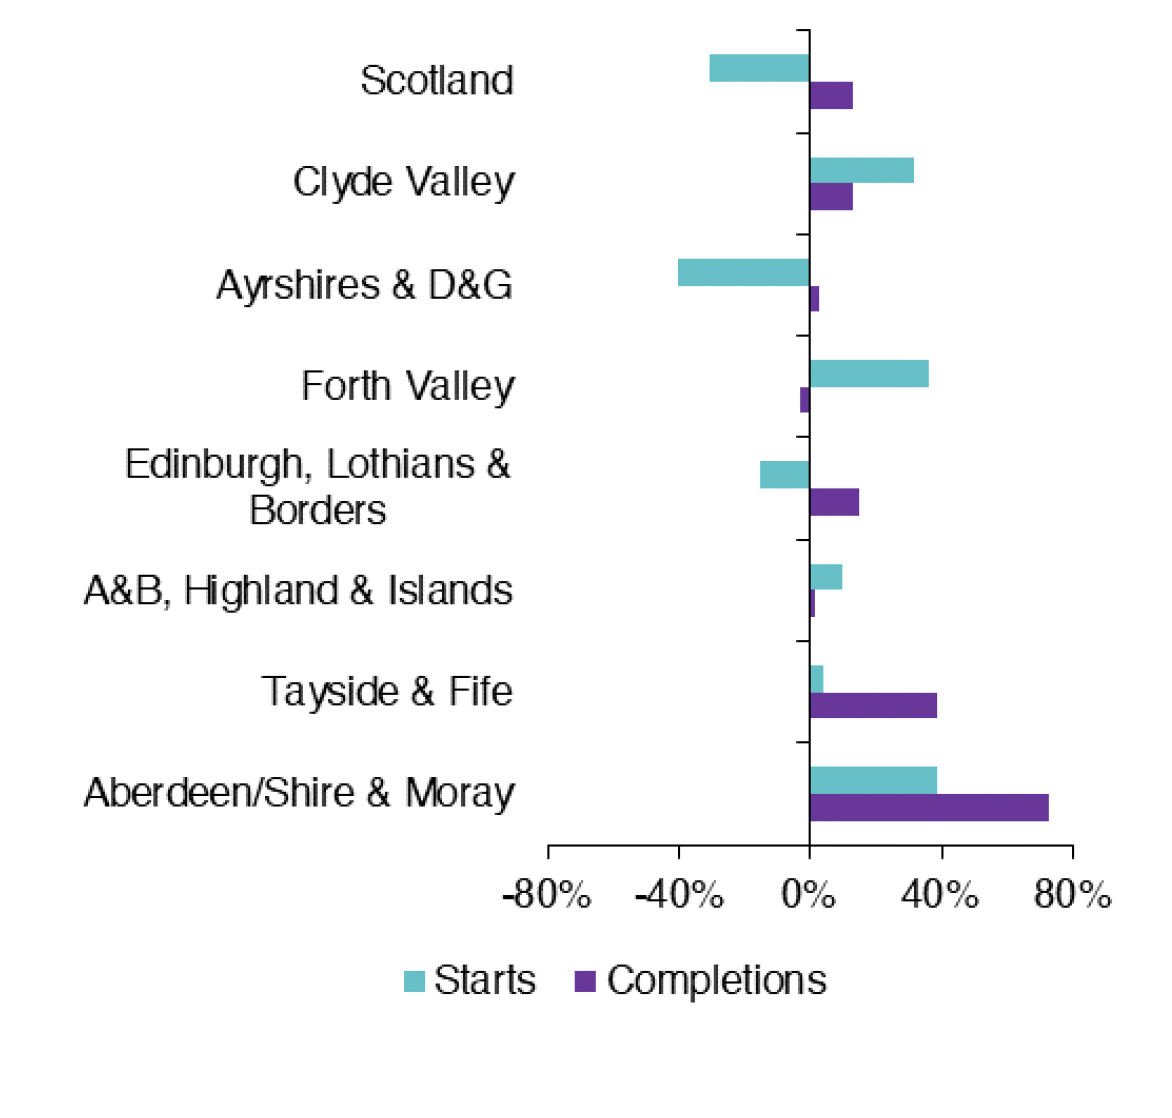 Chart 9.2 outlines the annual growth in new build starts and completions for Scotland as a whole and the respective regions. This is shown by comparing the one year period to Q1 2022 relative to the year prior. 